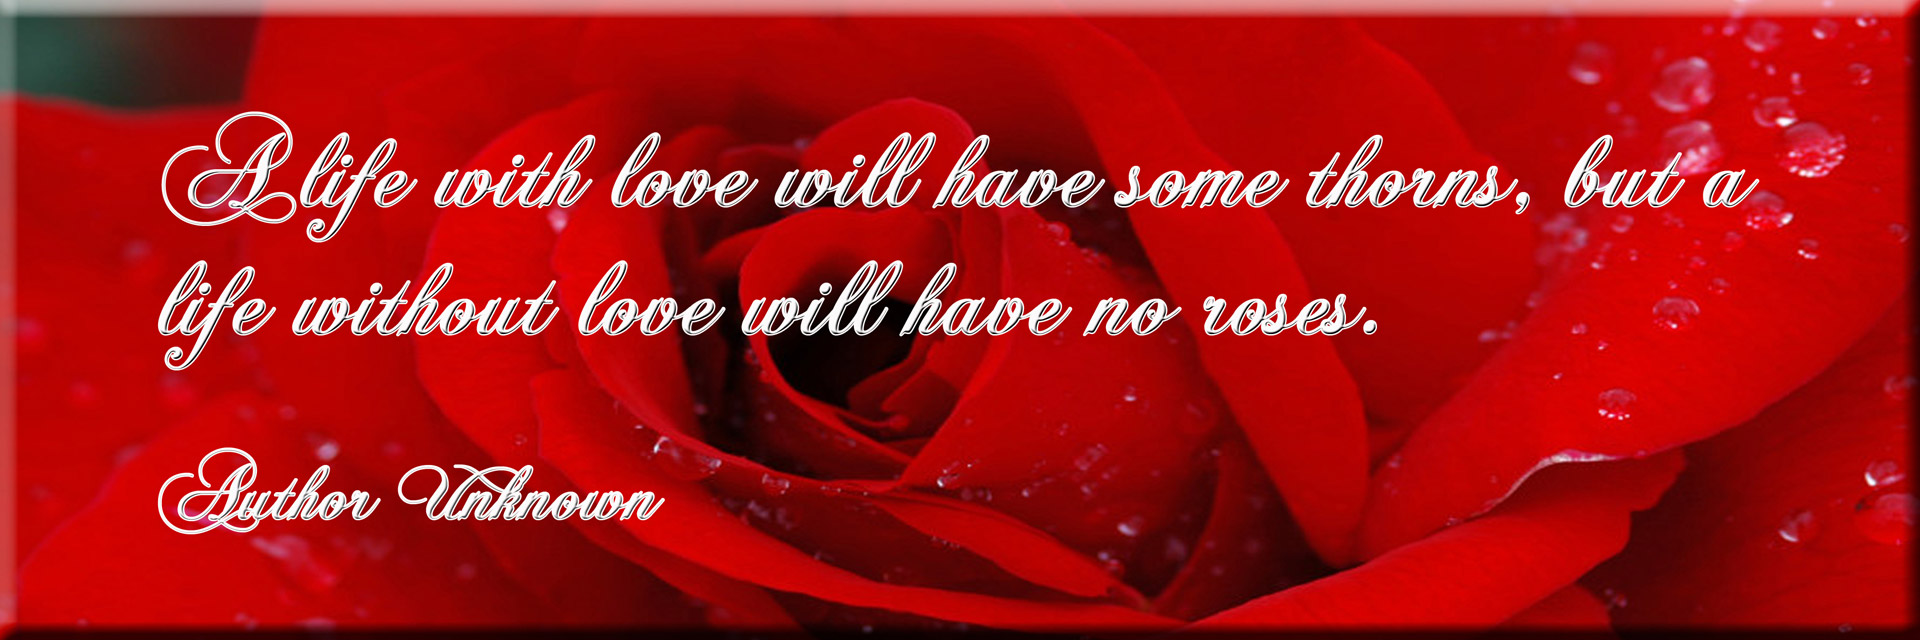 Quote about "a life with love will have some thorns"